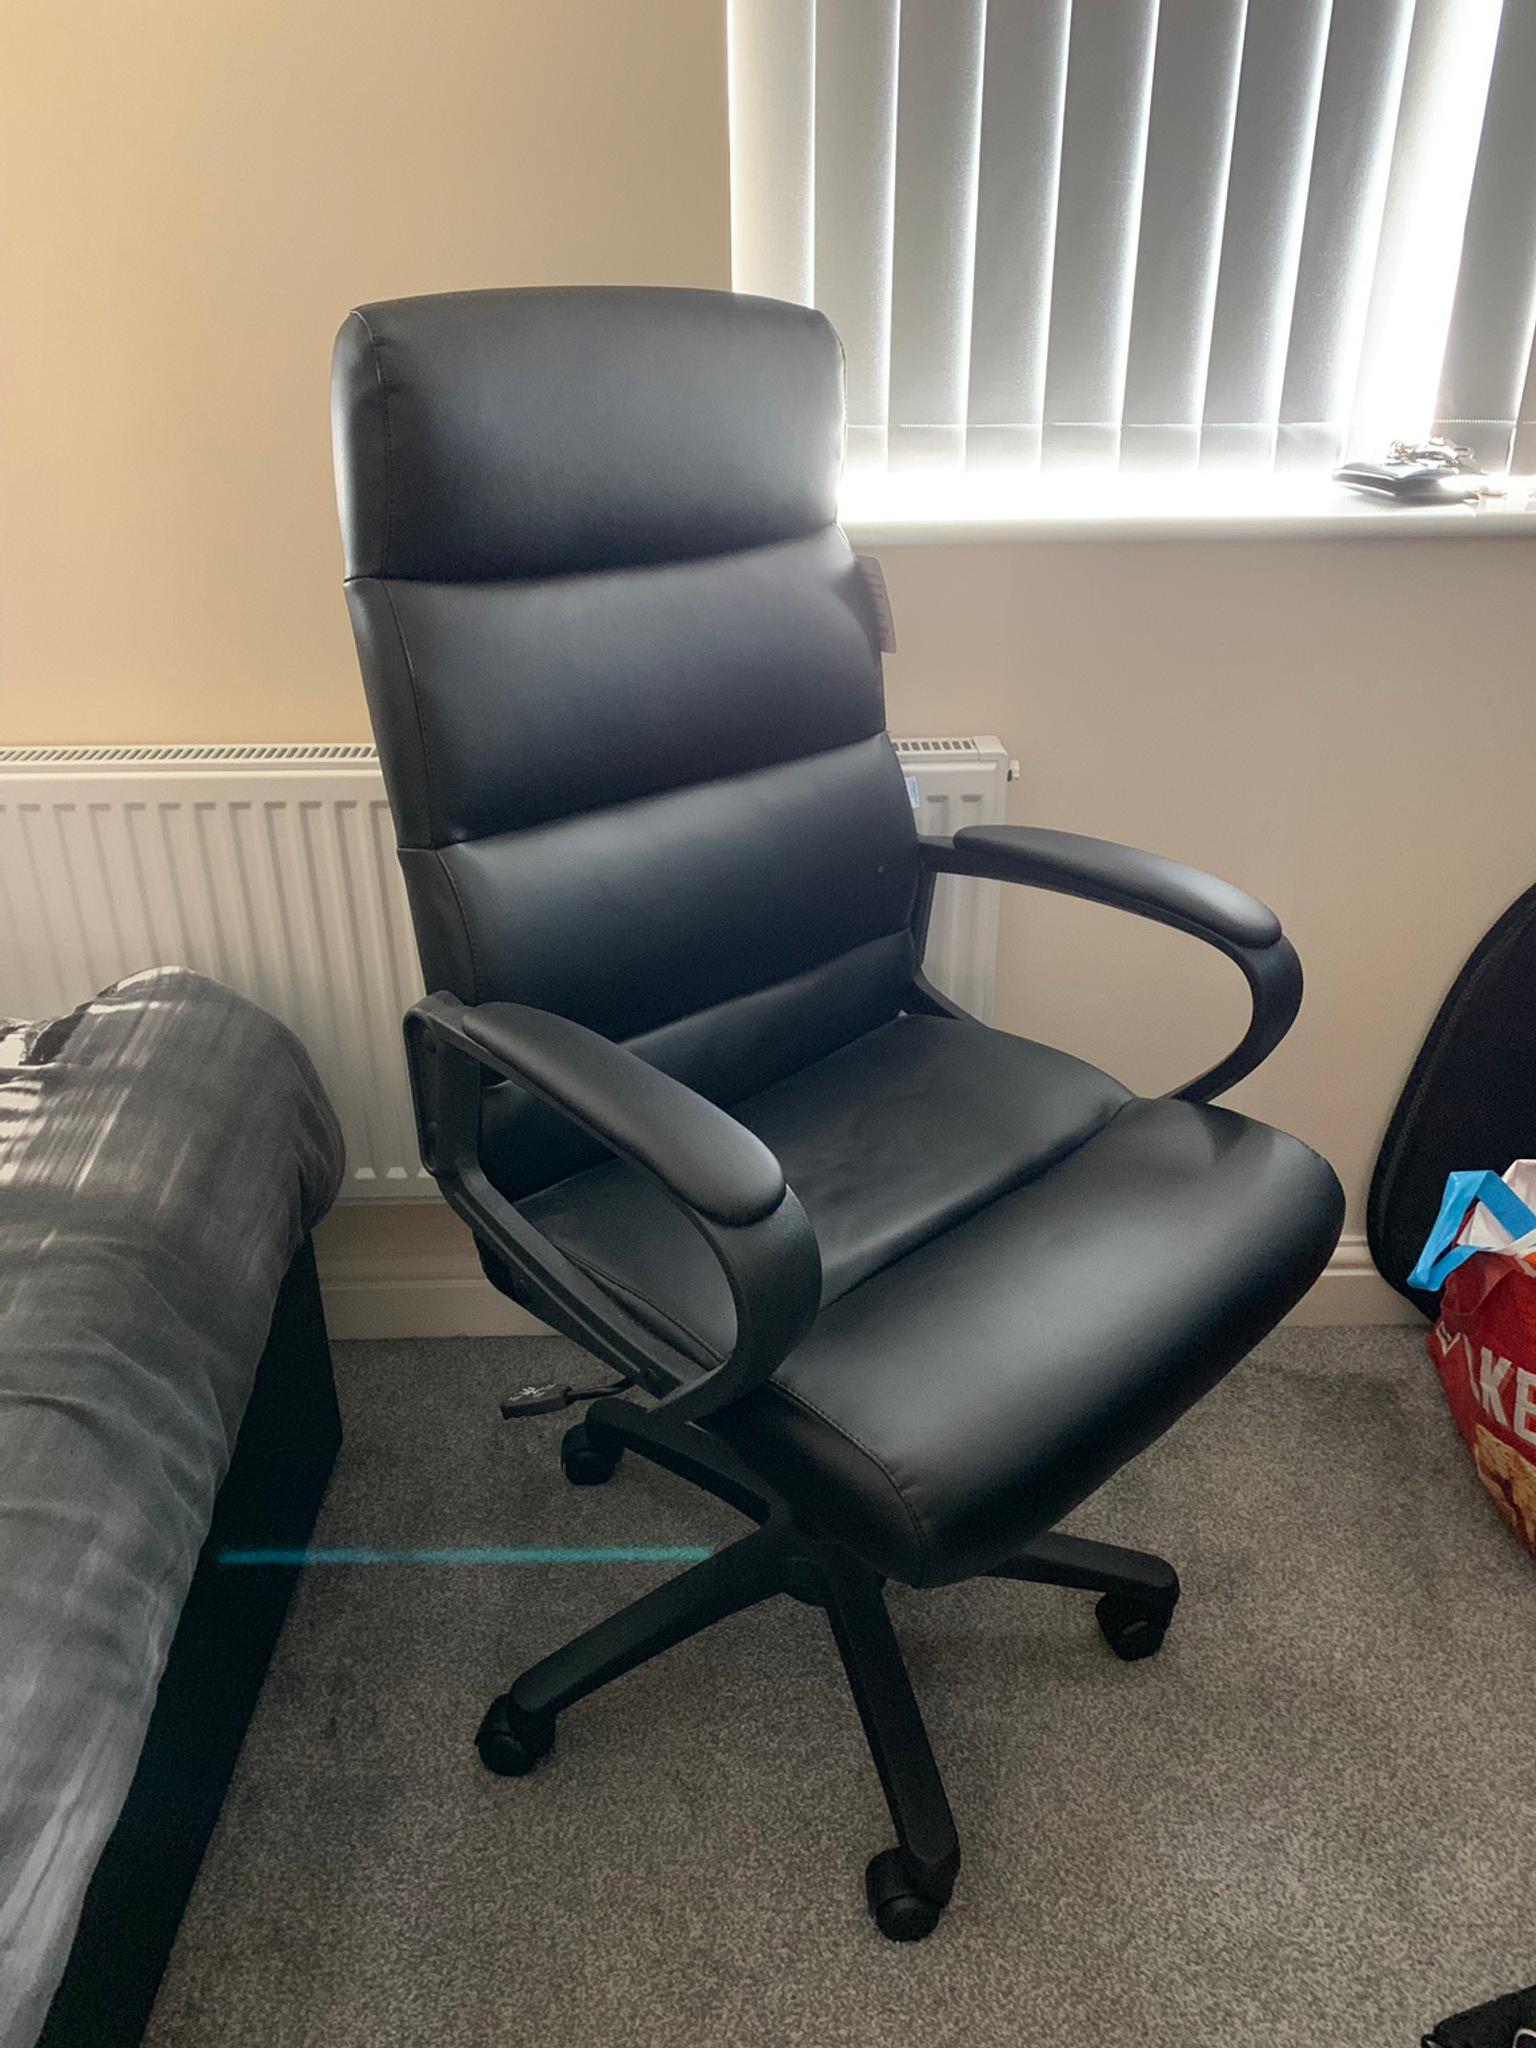 Niceday Malaga Leather Executive Office Chair In B64 Sandwell For 45 00 For Sale Shpock